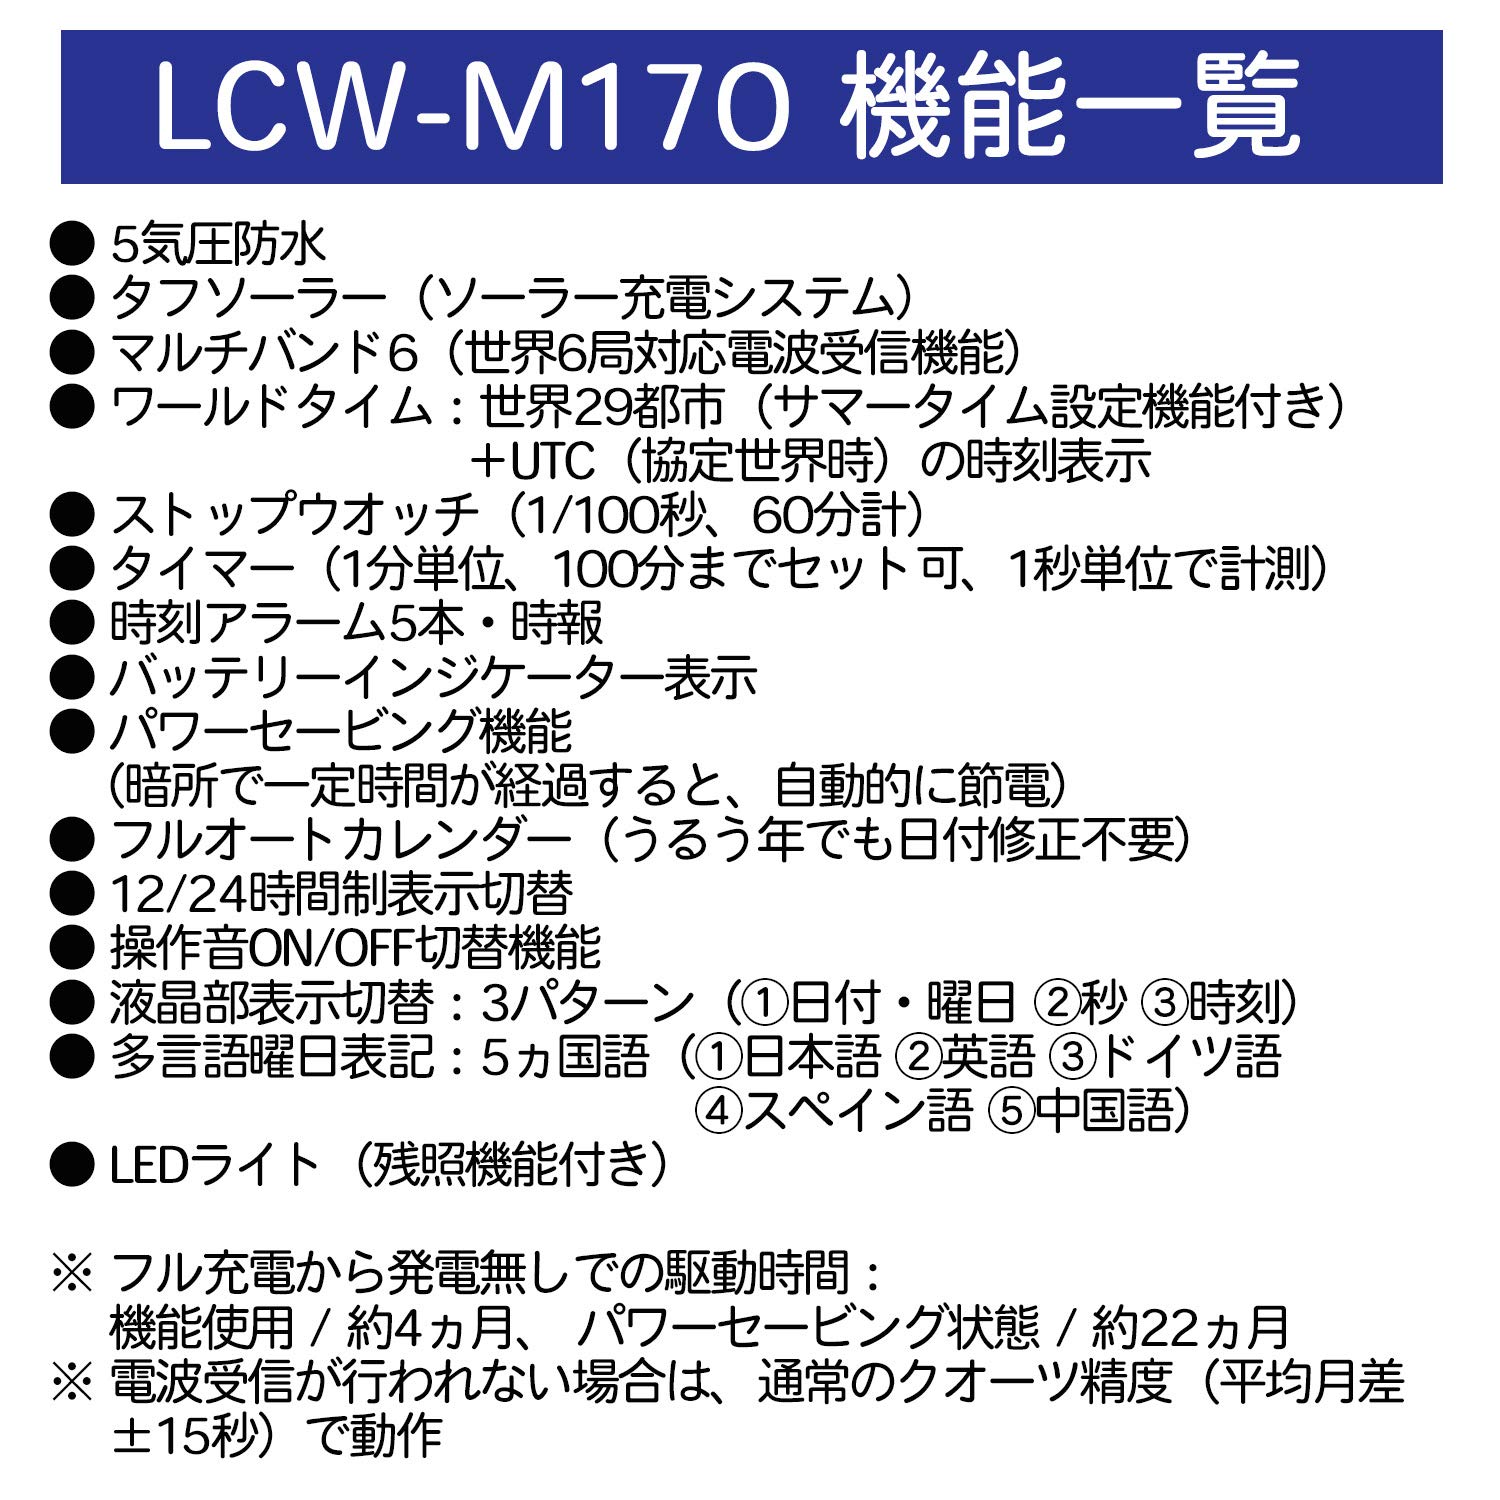 Casio LCW-M170TD-2AJF [Solar Radio Clock Lineage] Titanium Band Watch Imported from Japan Jan 2023 Model Silver/Navy